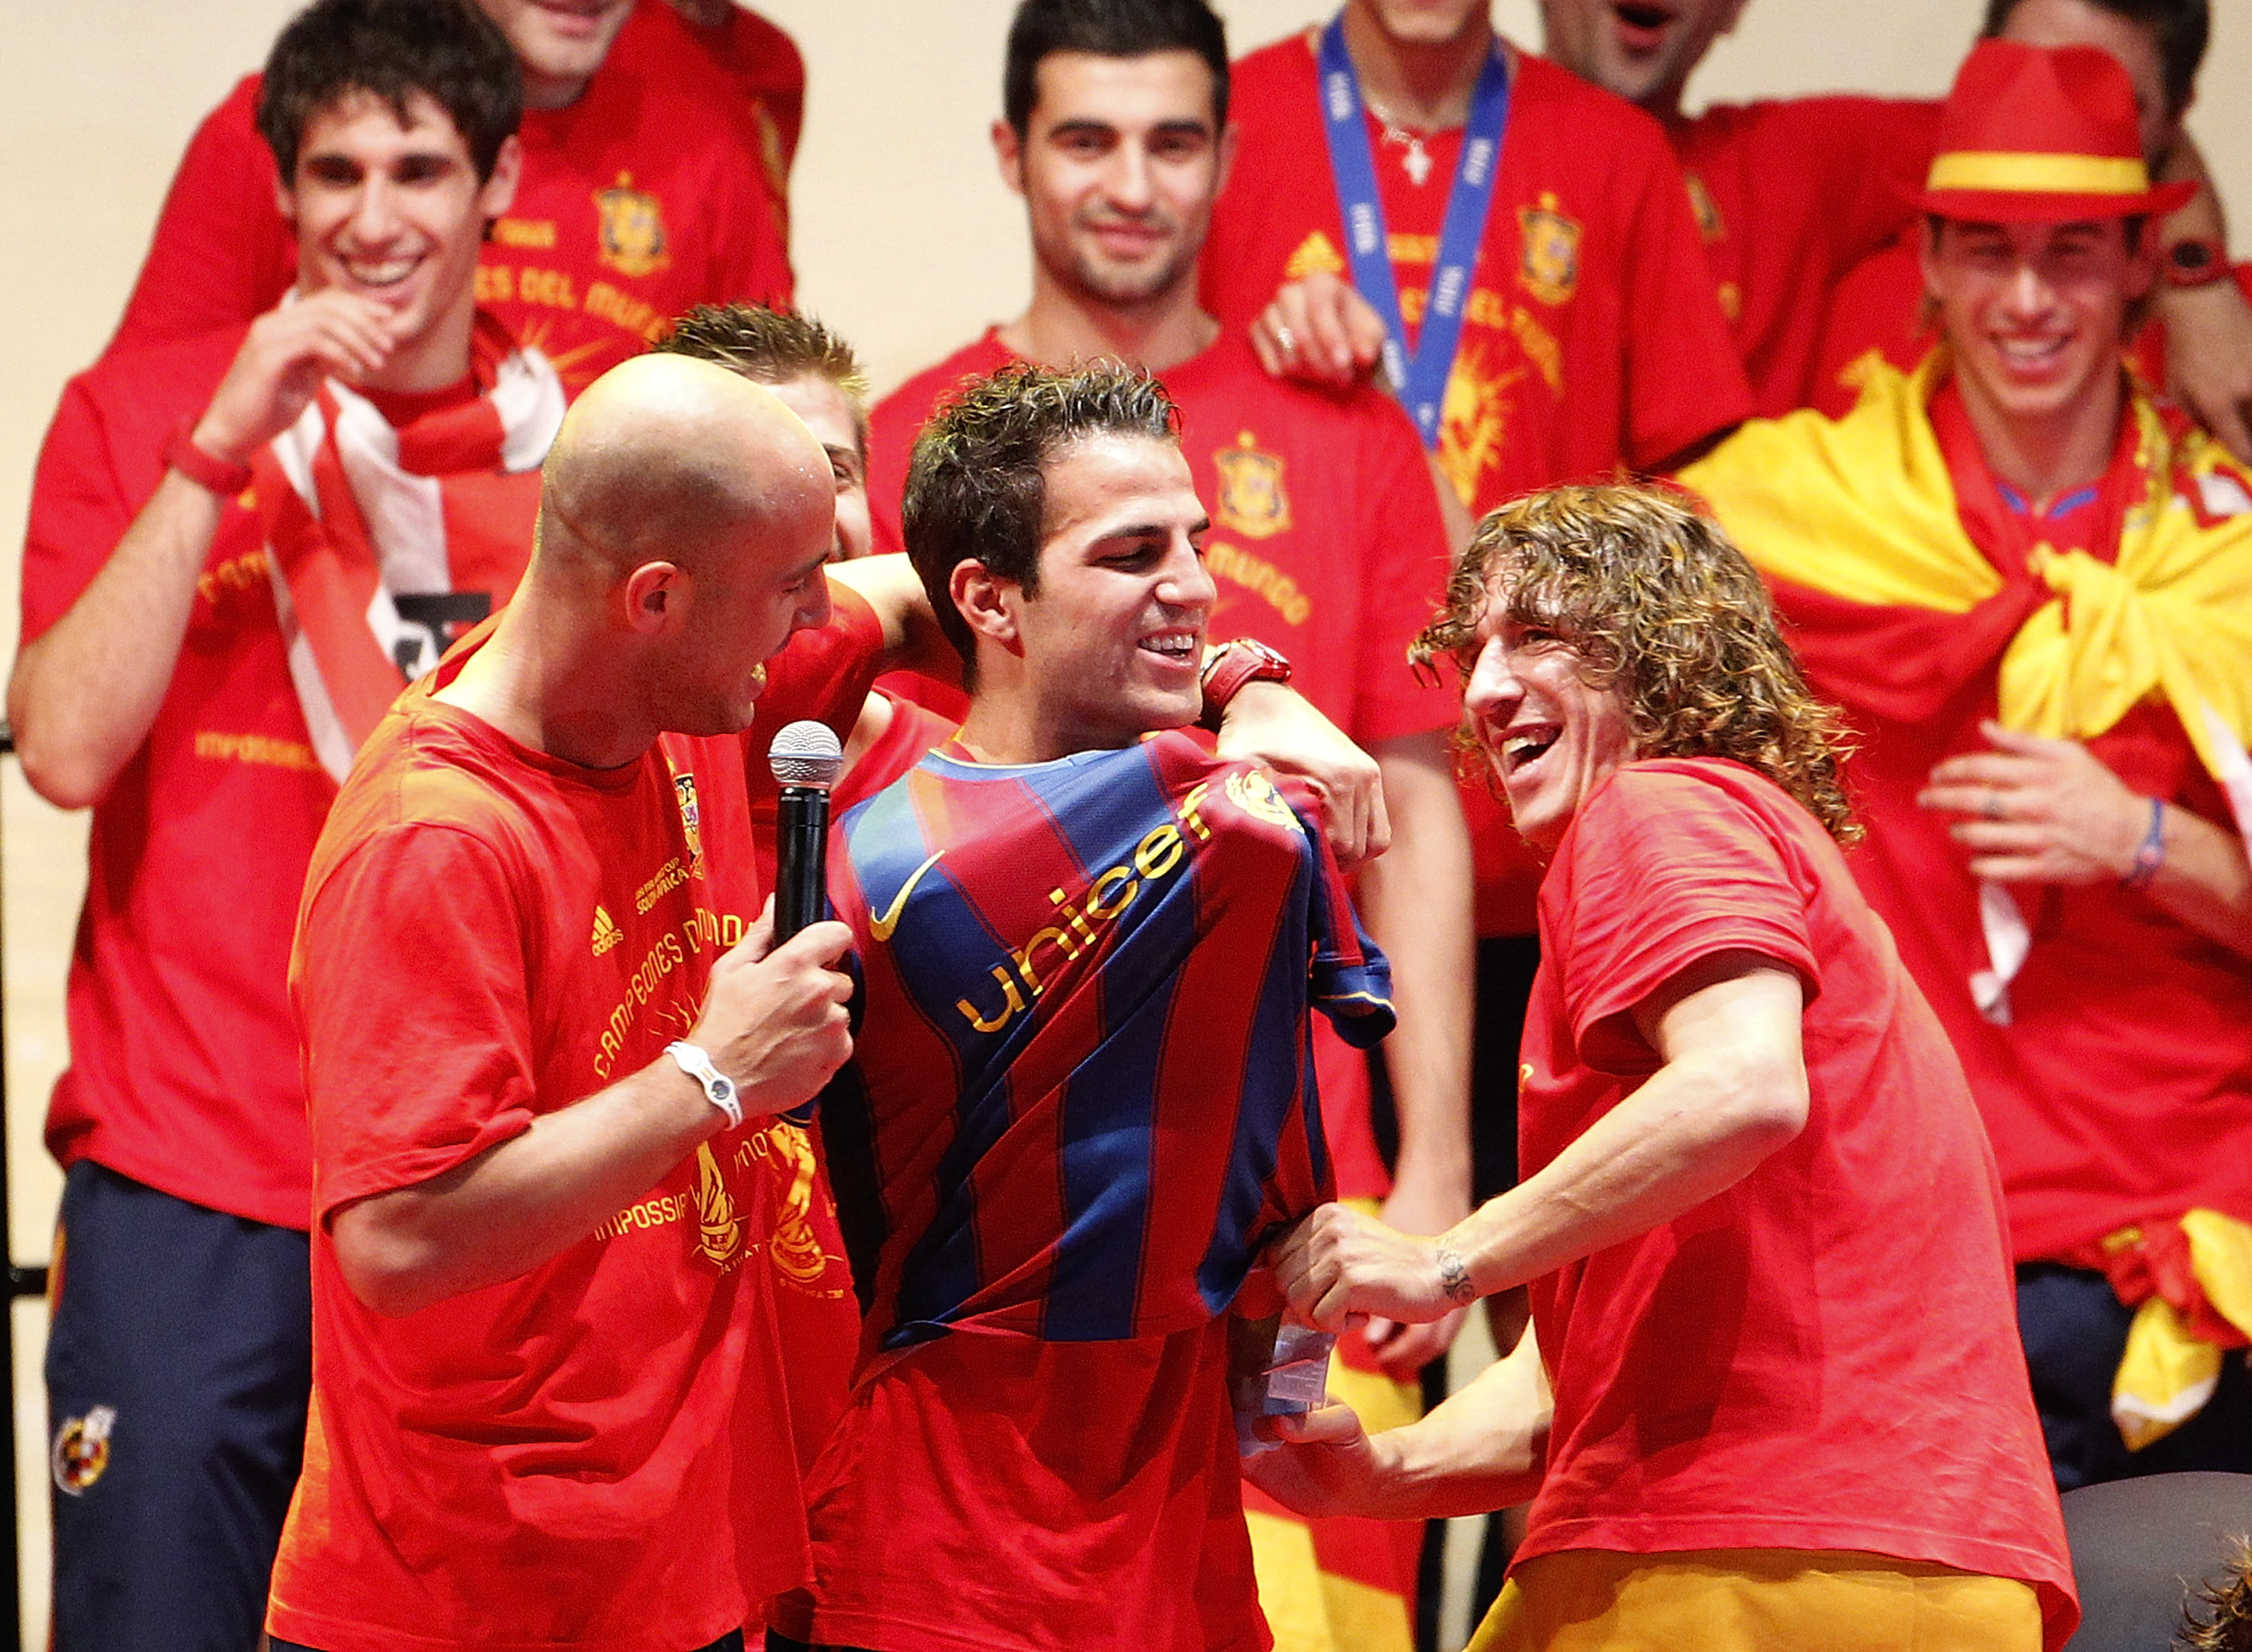 MADRID, SPAIN - JULY 12:  Pepe Reina (L) and Carles Puyol (R) of the Spanish national football team put a FC Barcelona shirt on Cesc Fabregas during the Spanish team's parade following their victory in the 2010 FIFA World Cup on July 12, 2010 in Madrid, S